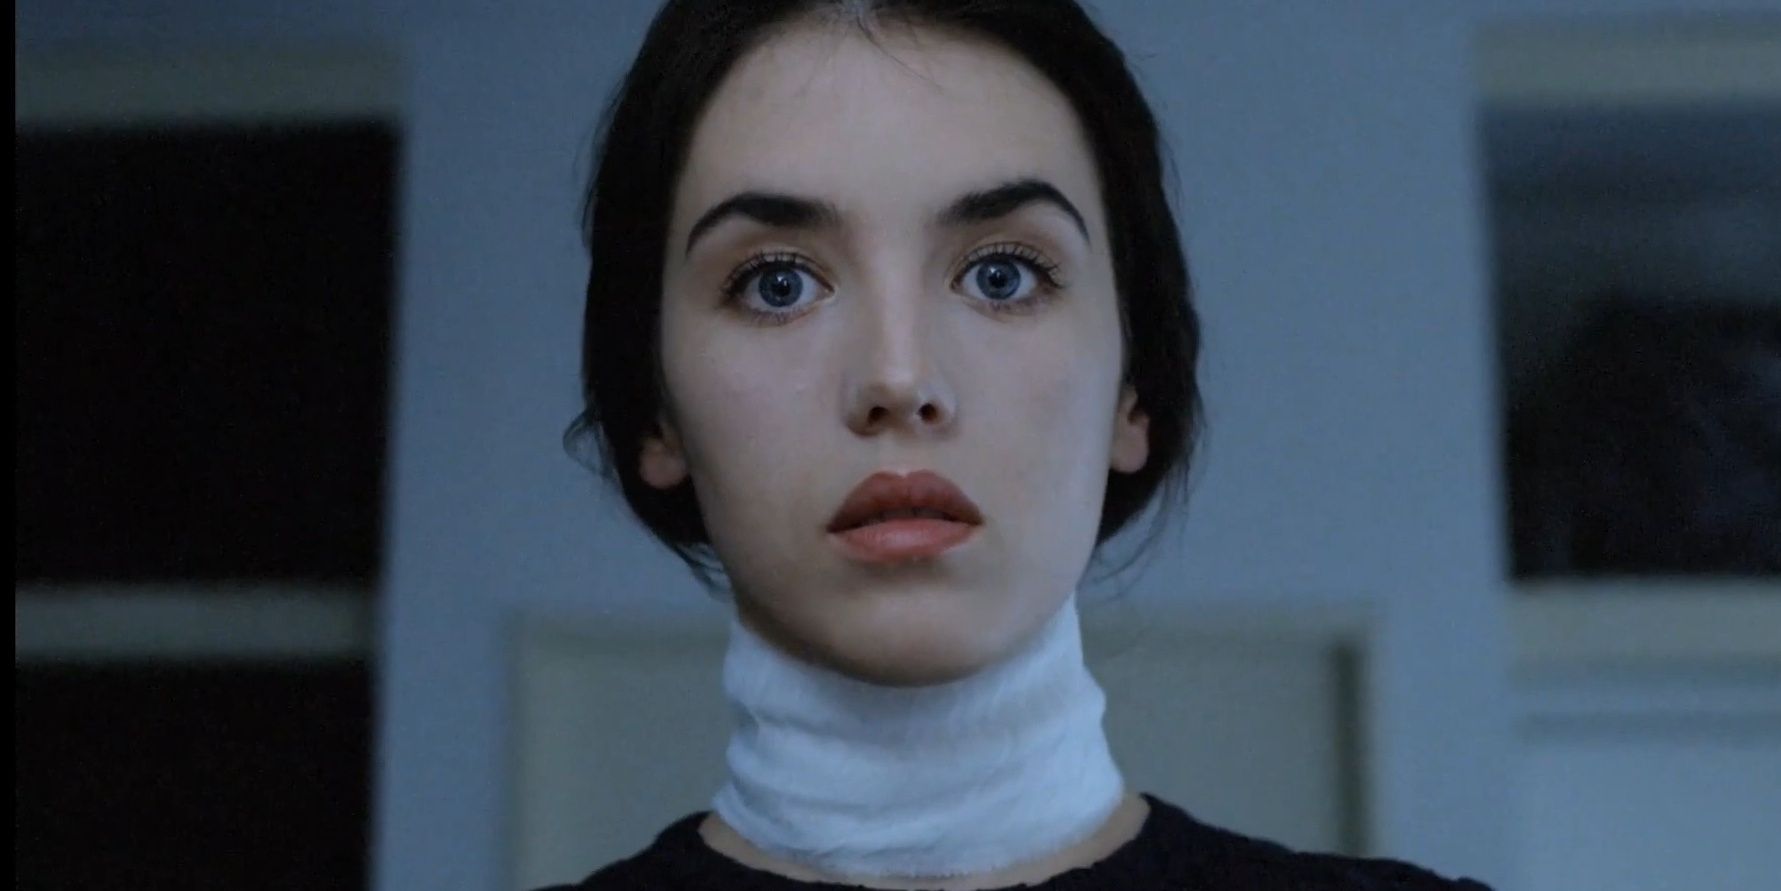 Isabelle Adjani in Possession staring into camera